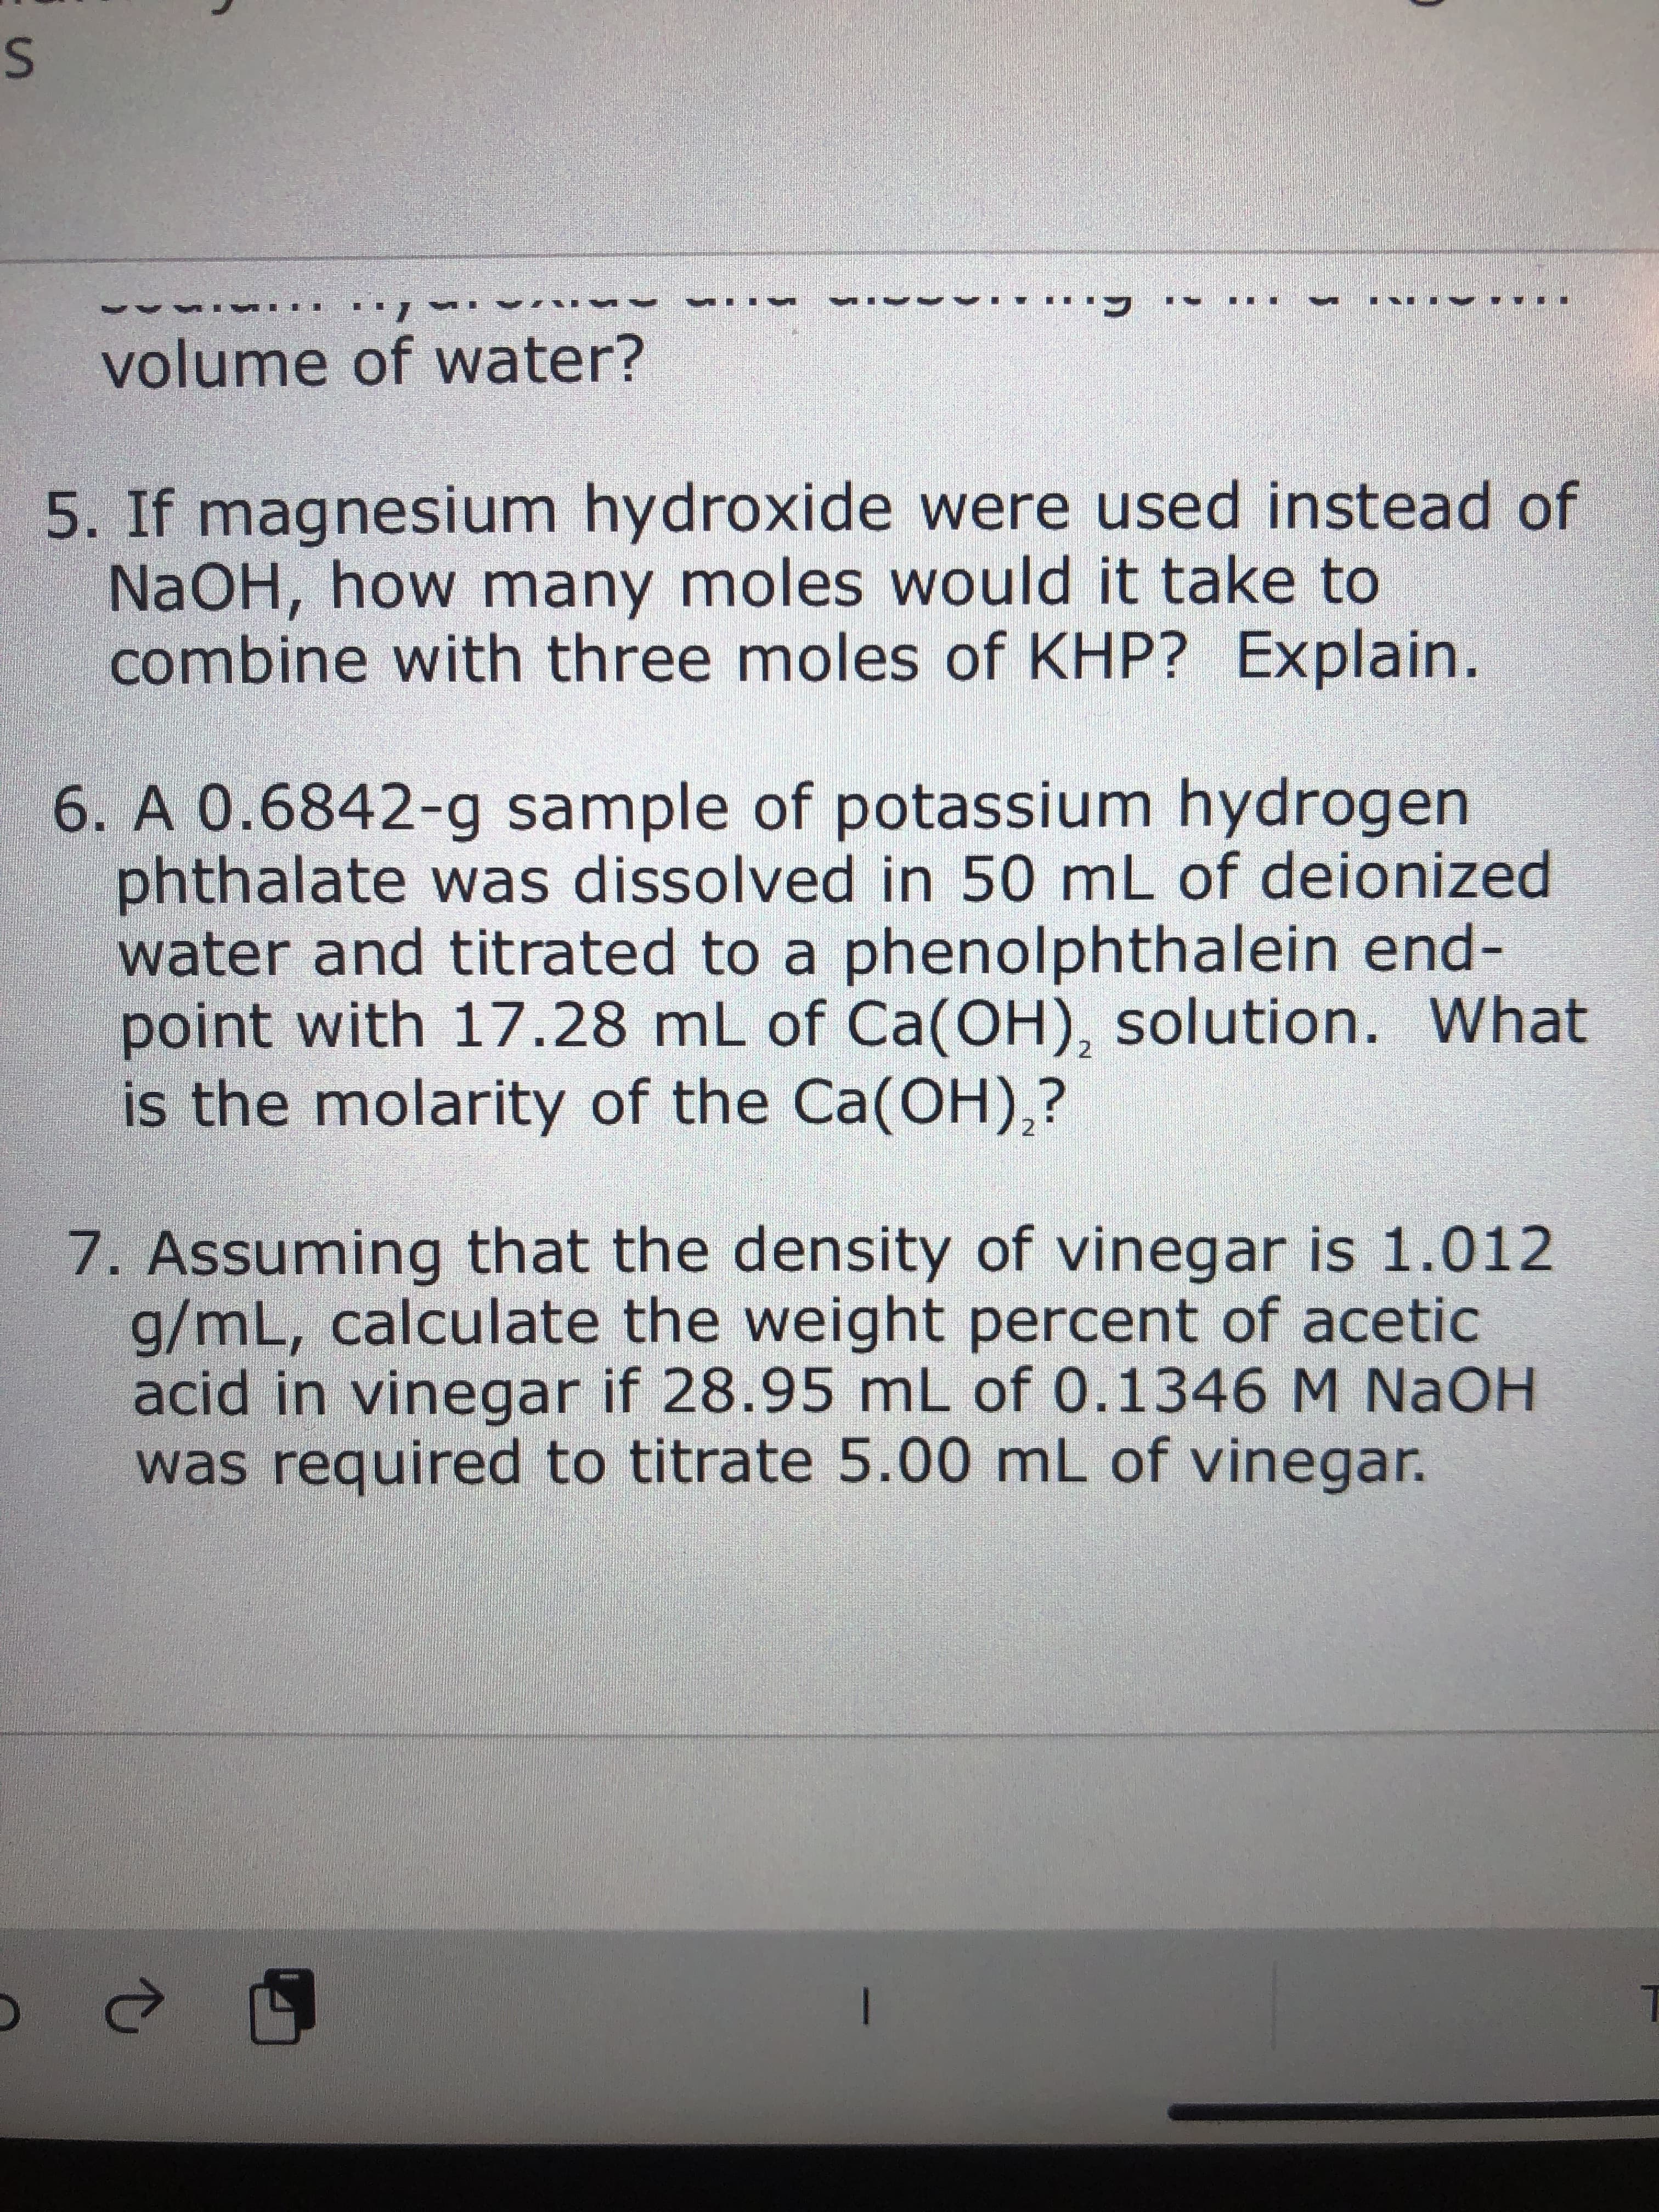 5. If magnesium hydroxide were used instead of
NaOH, how many moles would it take to
combine with three moles of KHP? Explain.
